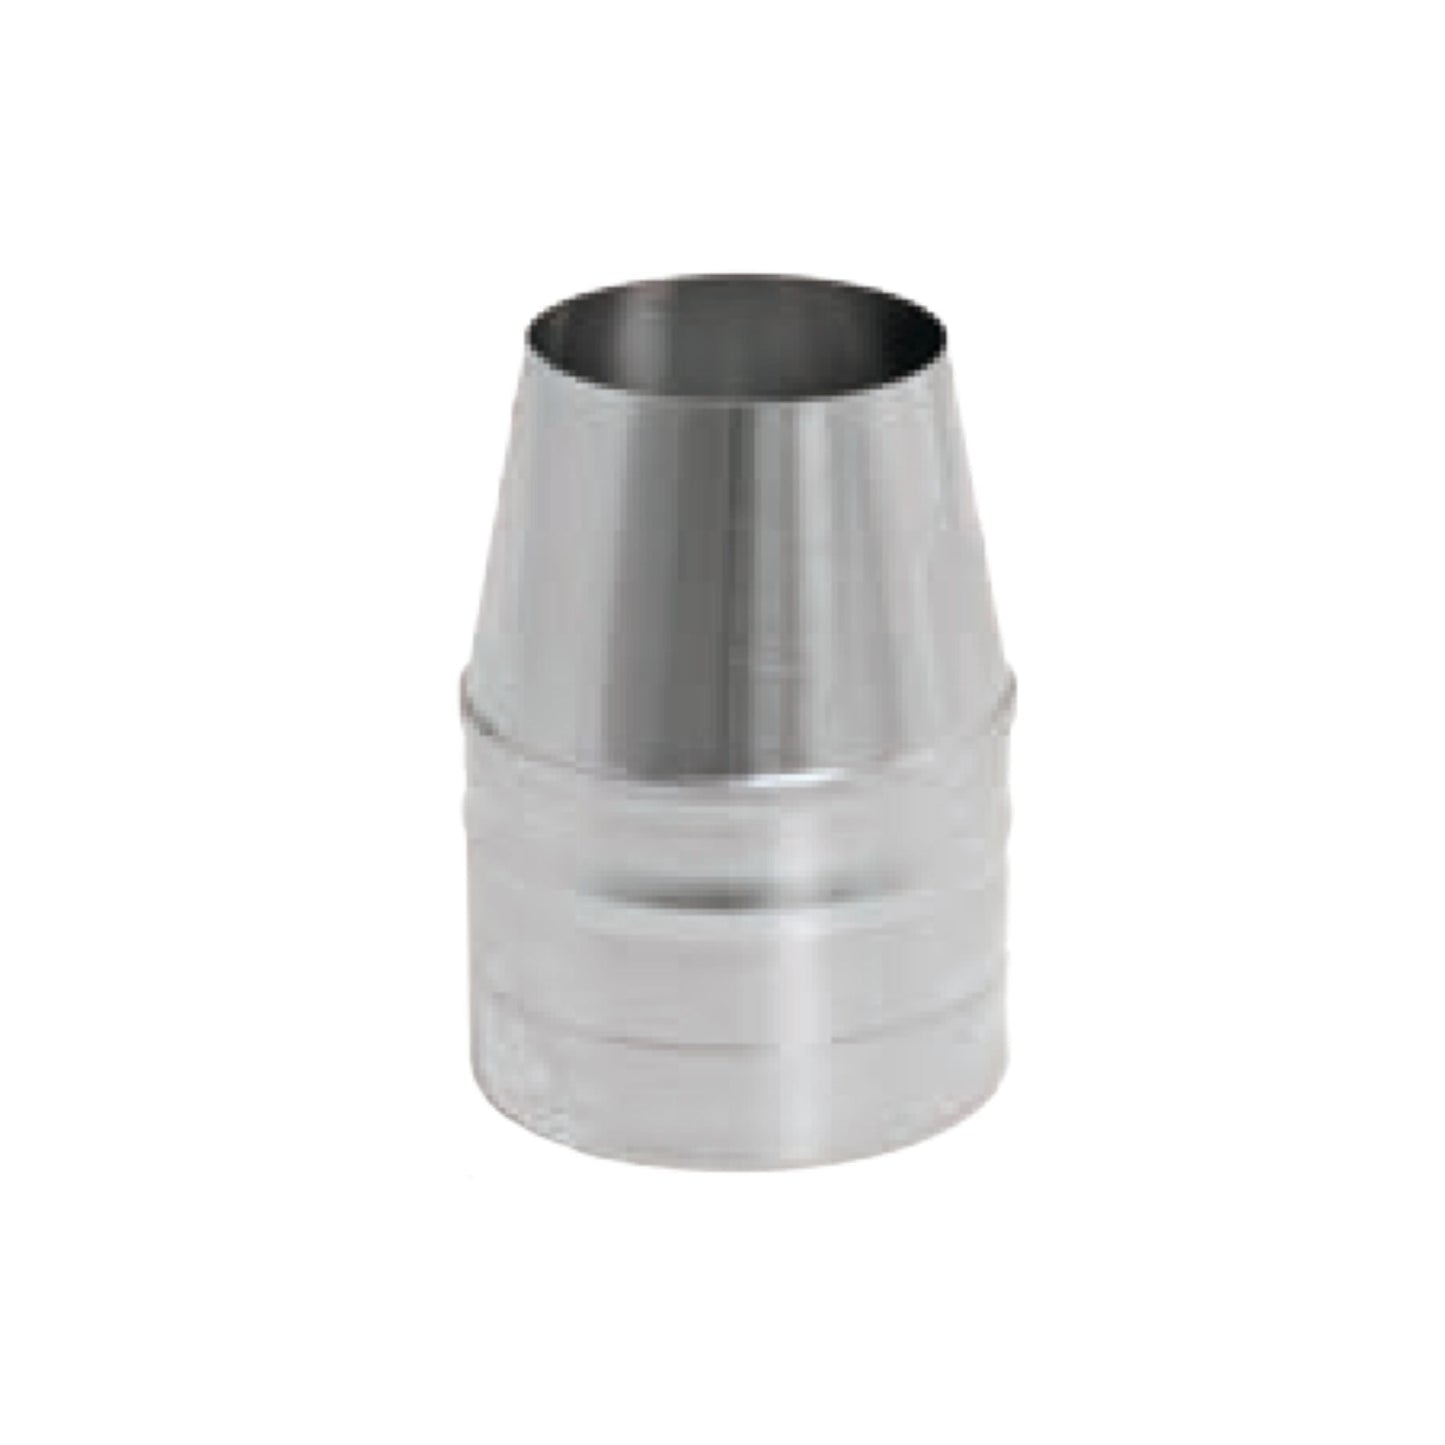 DuraVent FasNSeal 10" x 7" 29-4C Stainless Steel Termination Cone